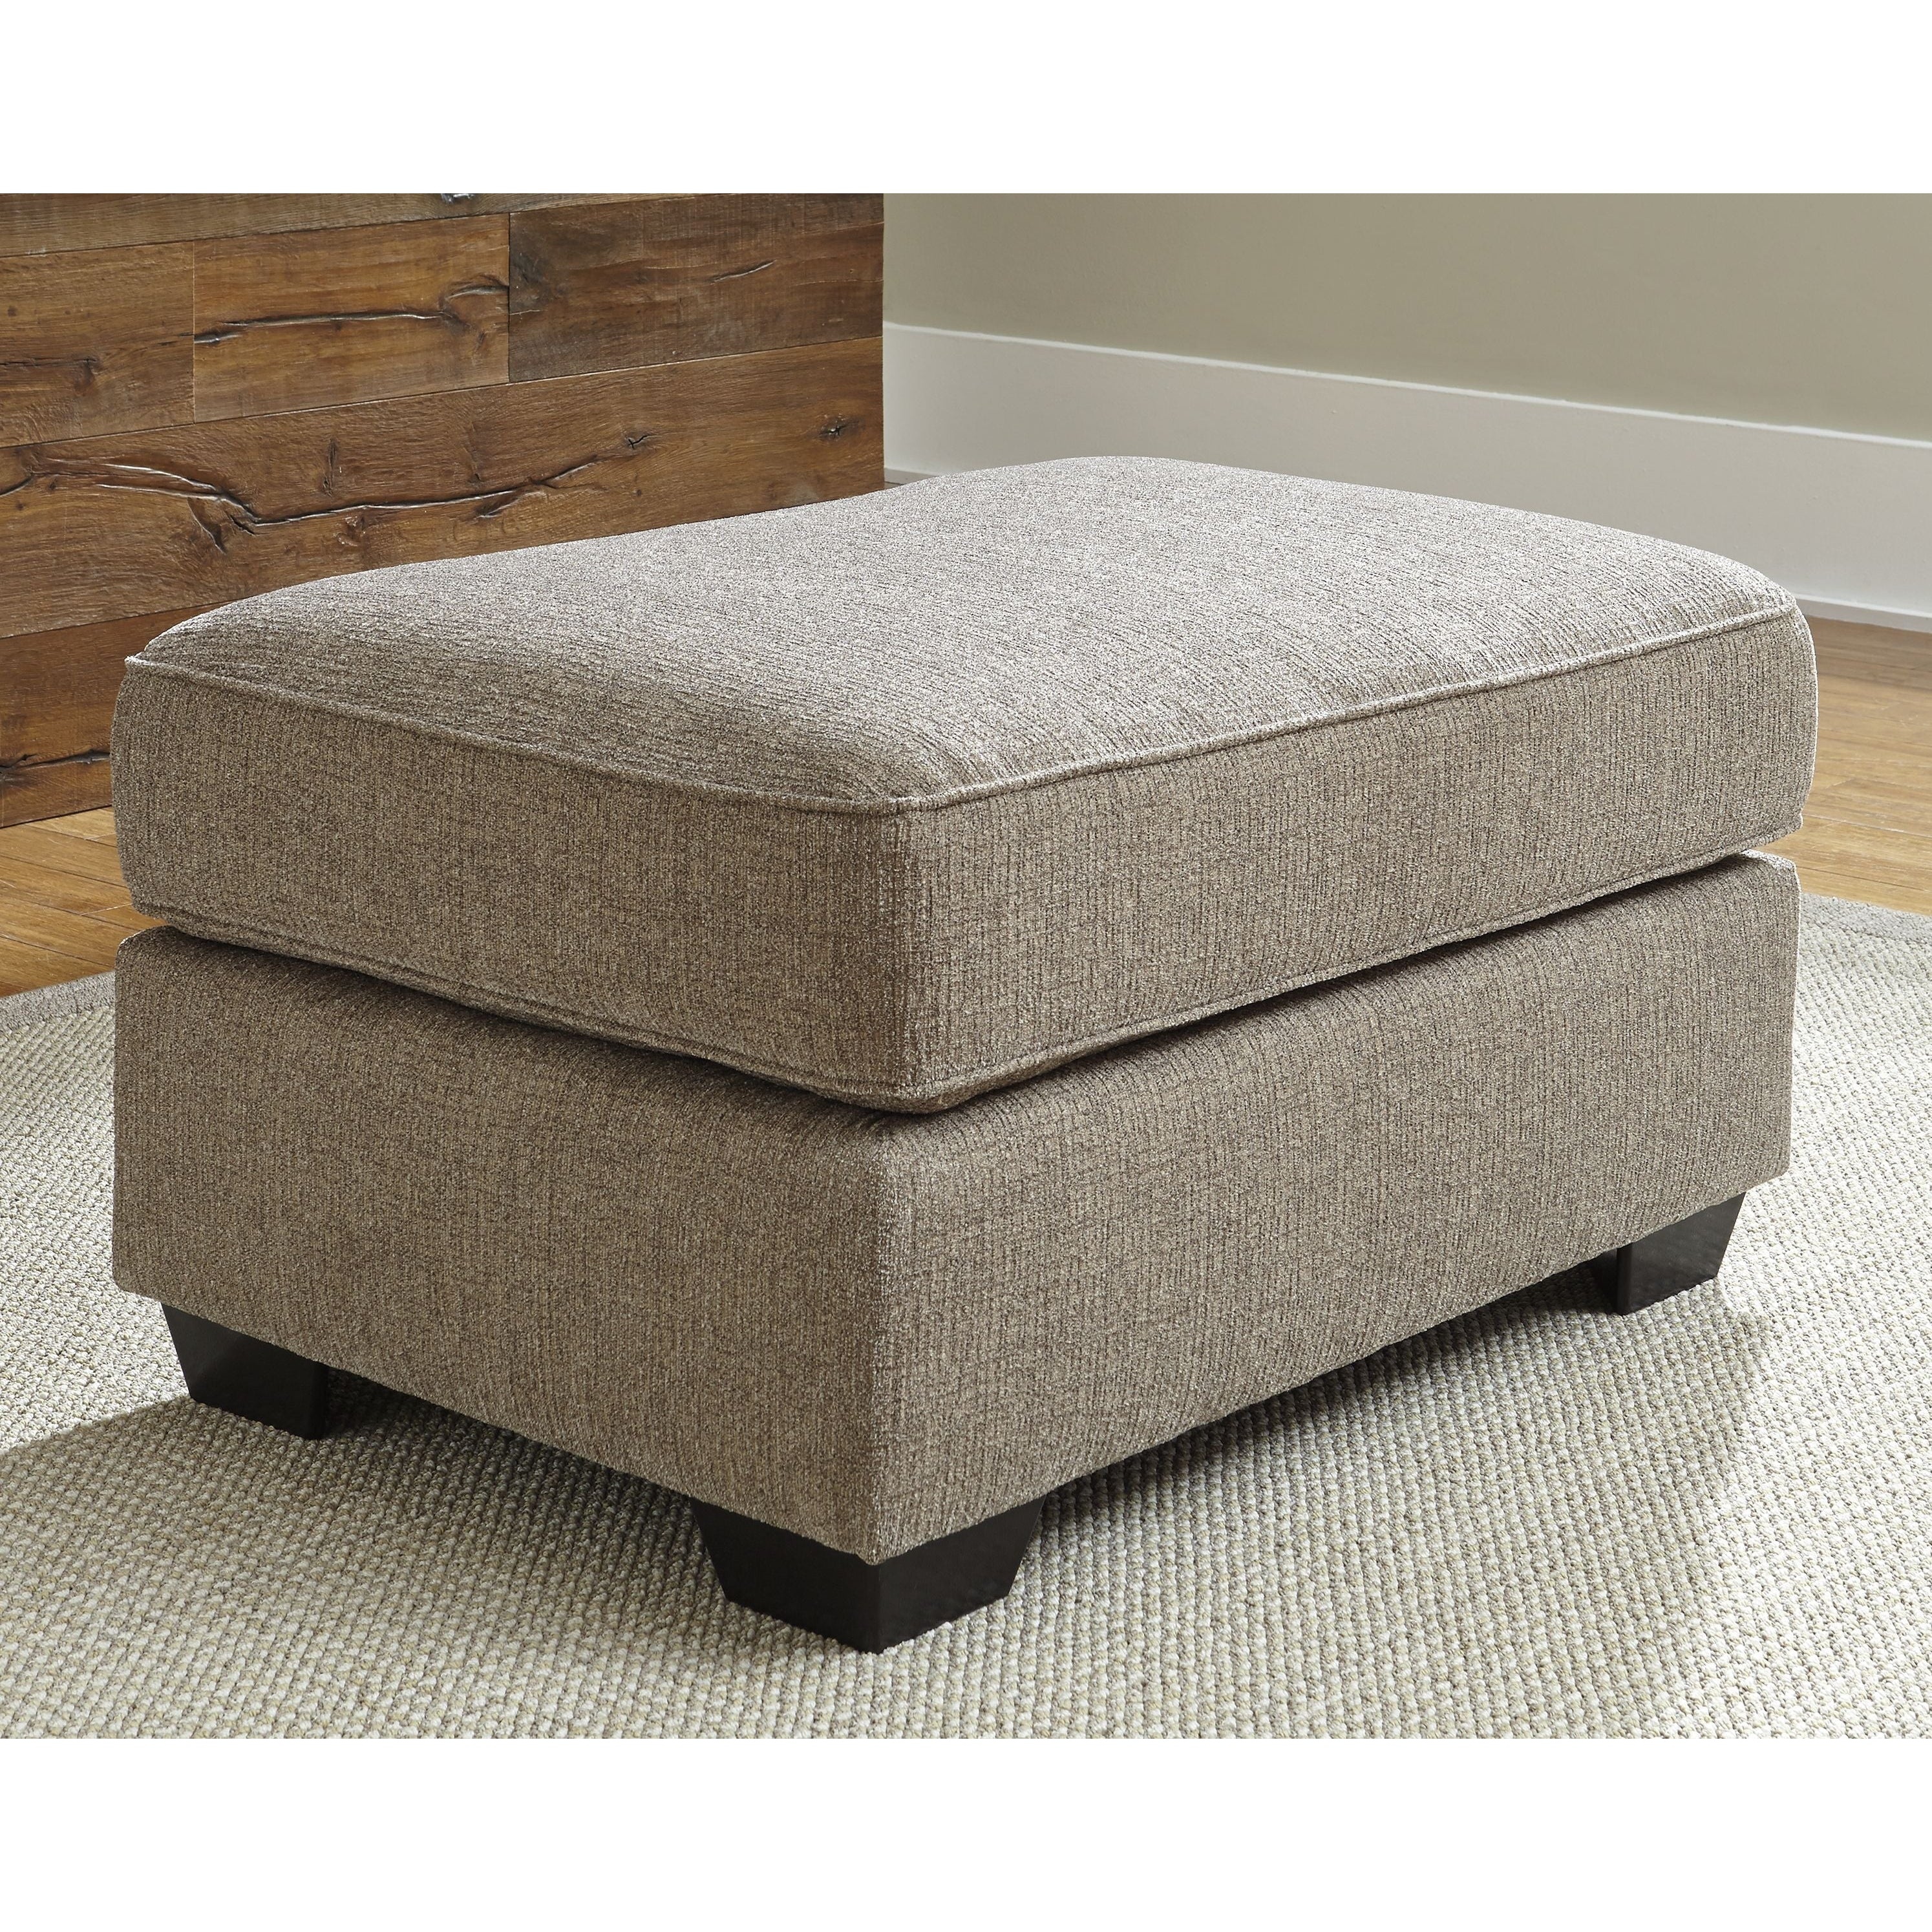 Pantomine - Driftwood - Oversized Accent Ottoman